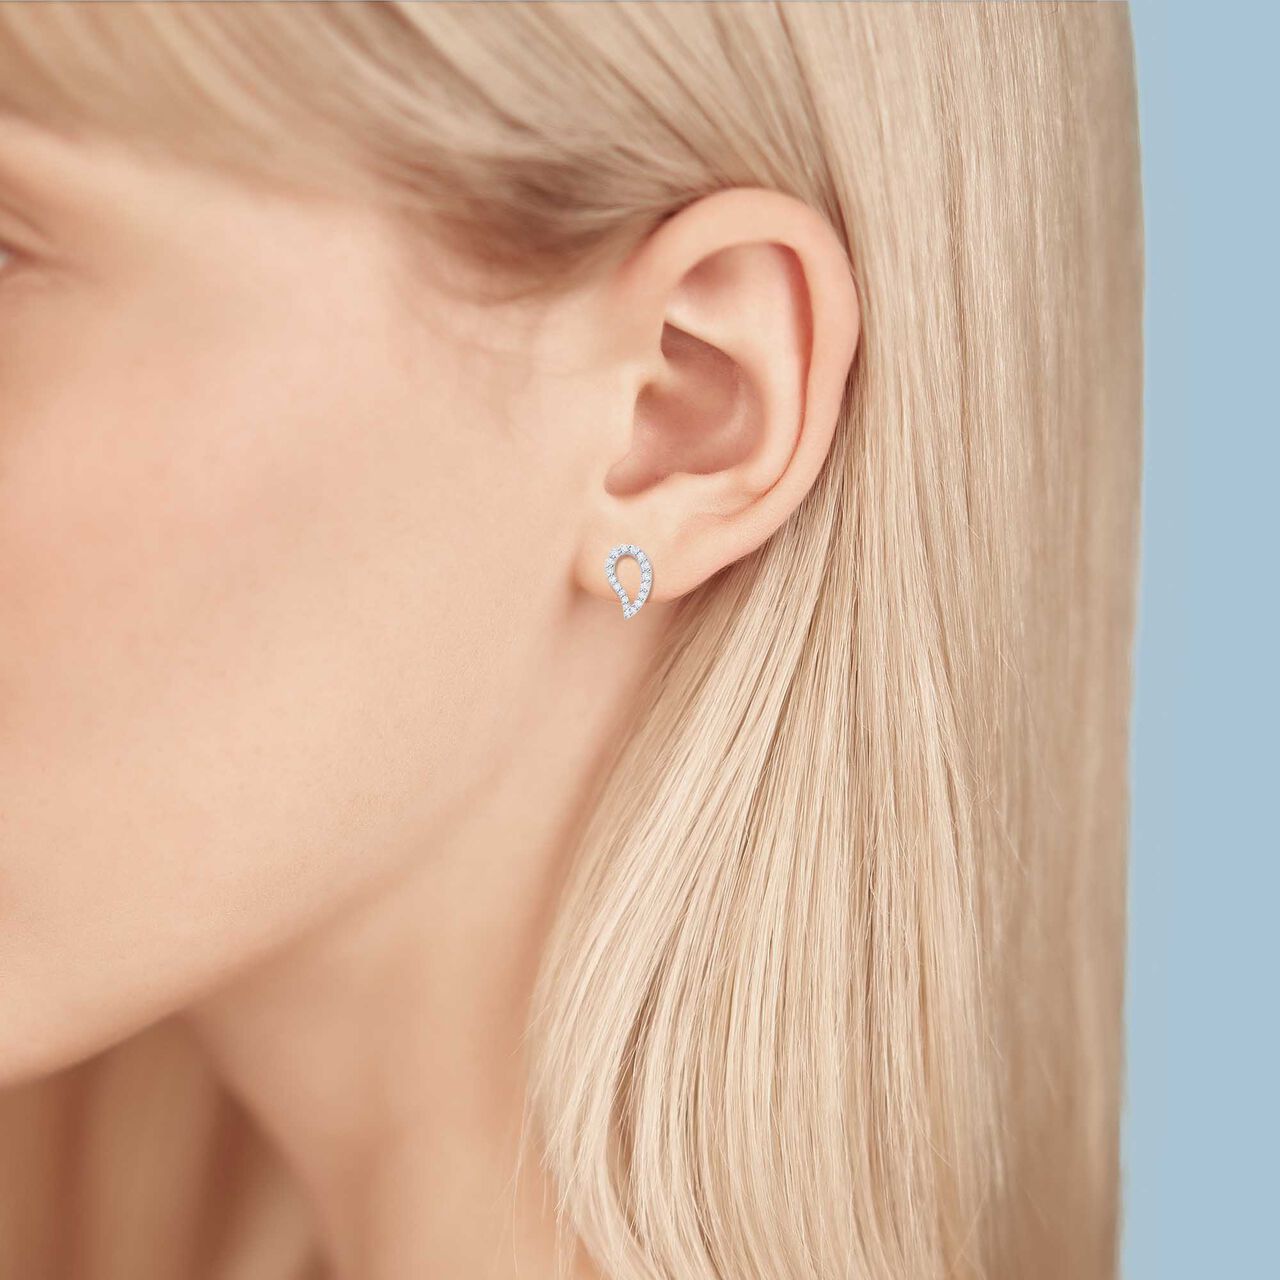 Birks PÃ©tale Small Diamond and White Gold Stud Earrings on model image number 2